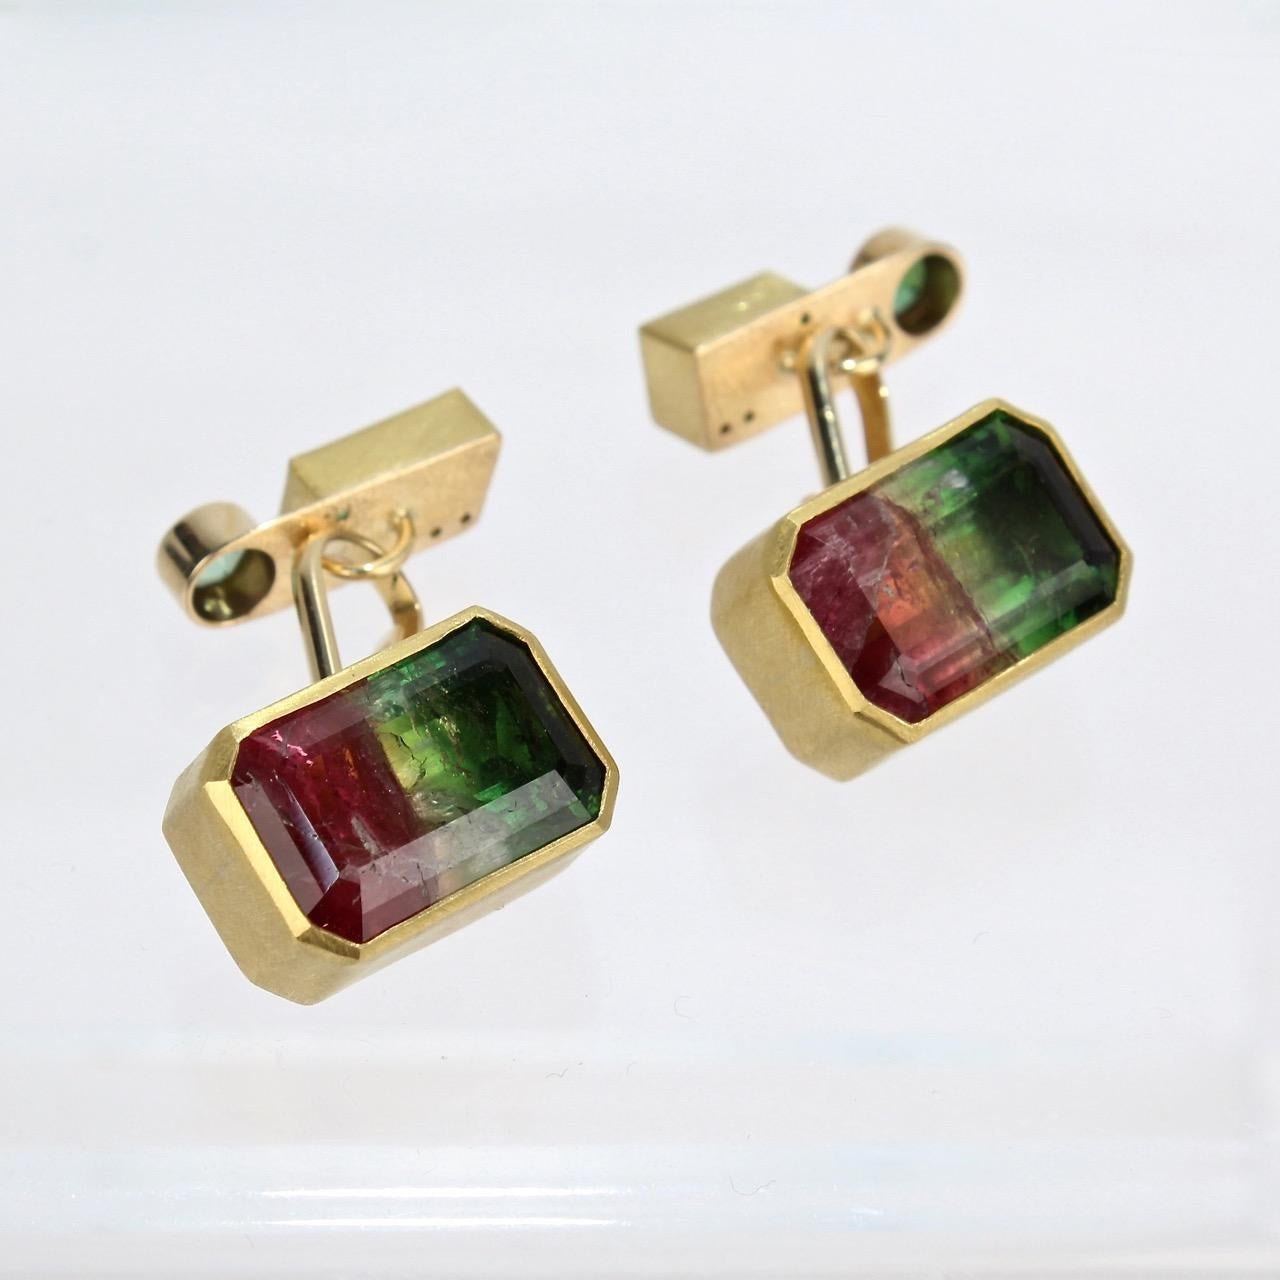 A very fine set of bezel set watermelon tourmaline and gold cufflinks by Isabelle Posillico.

These stunning watermelon tourmaline gemstones are set in a combination of 14k, 18K, and 22K gold and present as a truly striking pair of cufflinks. 

The